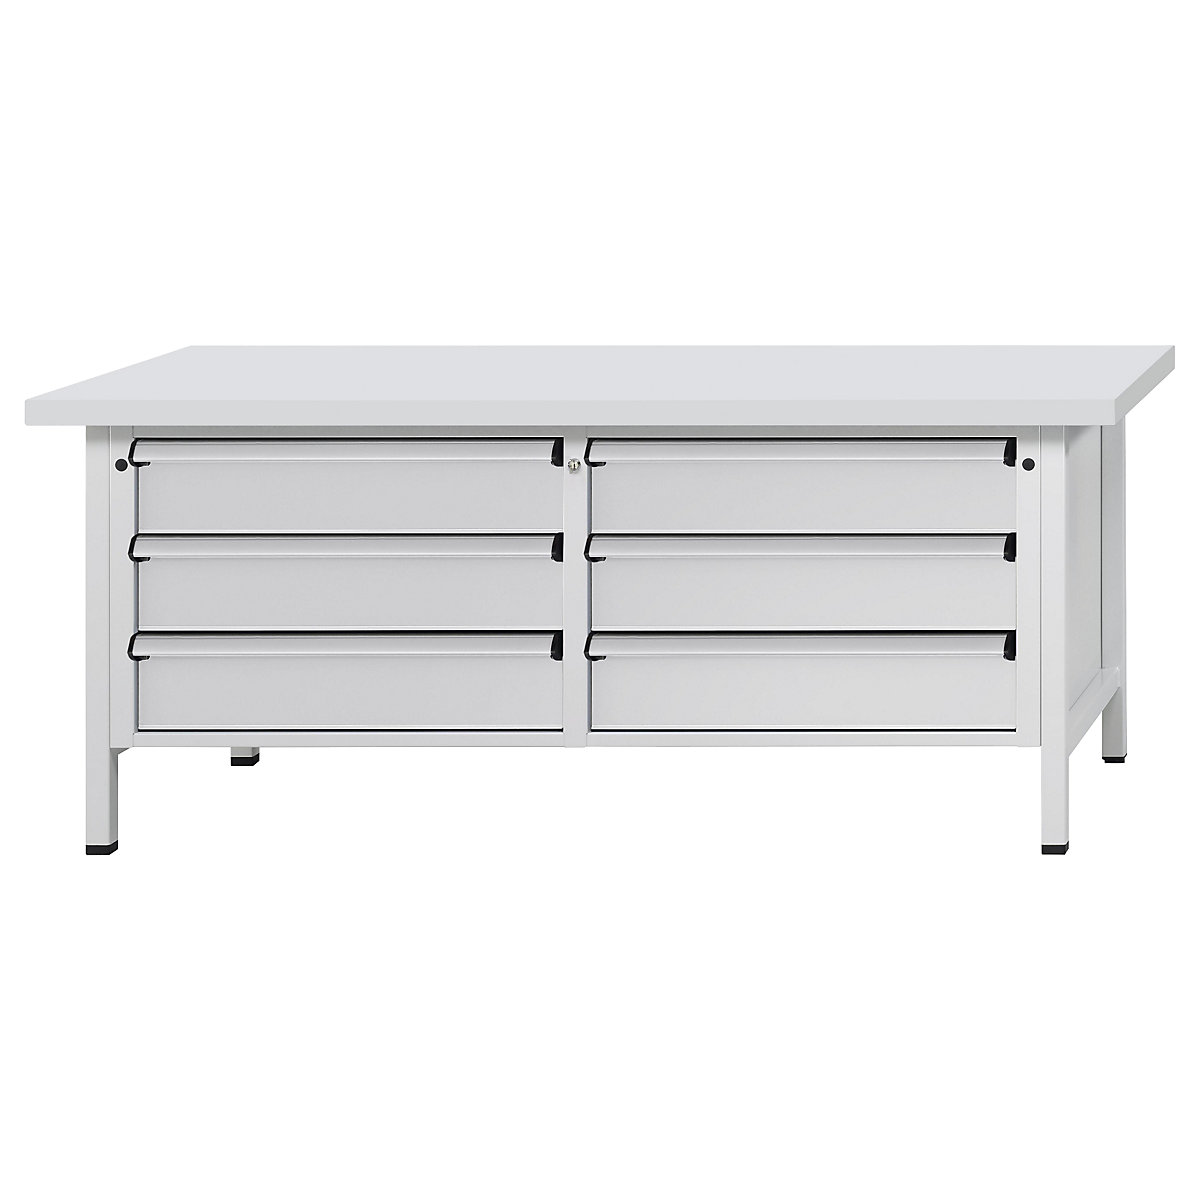 Workbench with XL/XXL drawers, frame construction – ANKE, width 2000 mm, 6 x 180 mm drawers, universal worktop, front in light grey-9